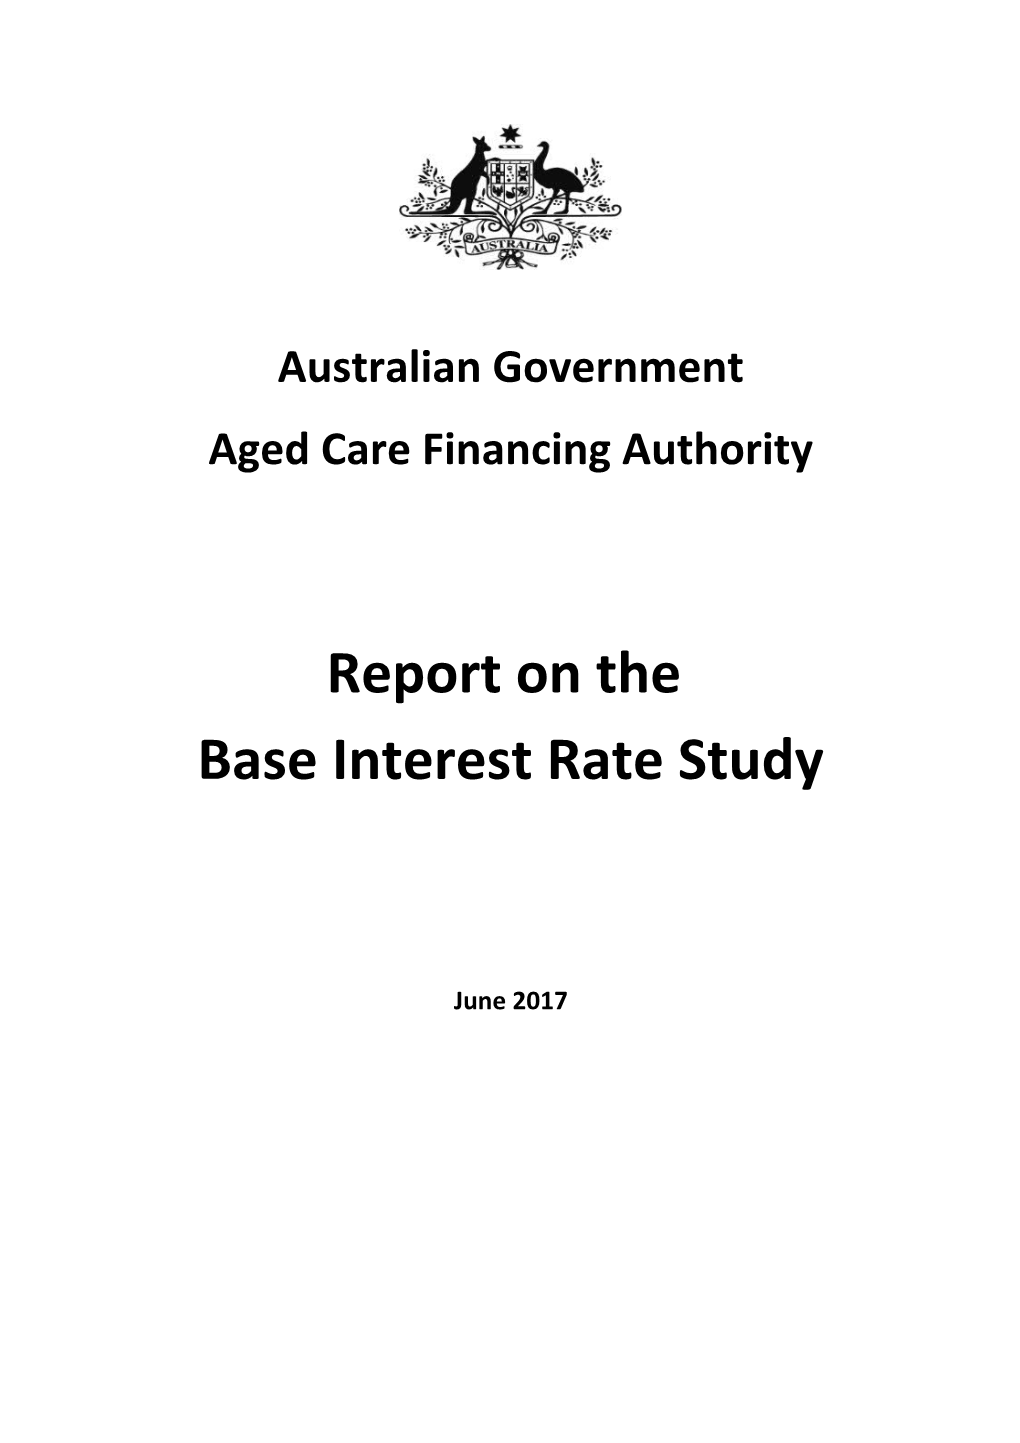 Report on the Base Interest Rate Study